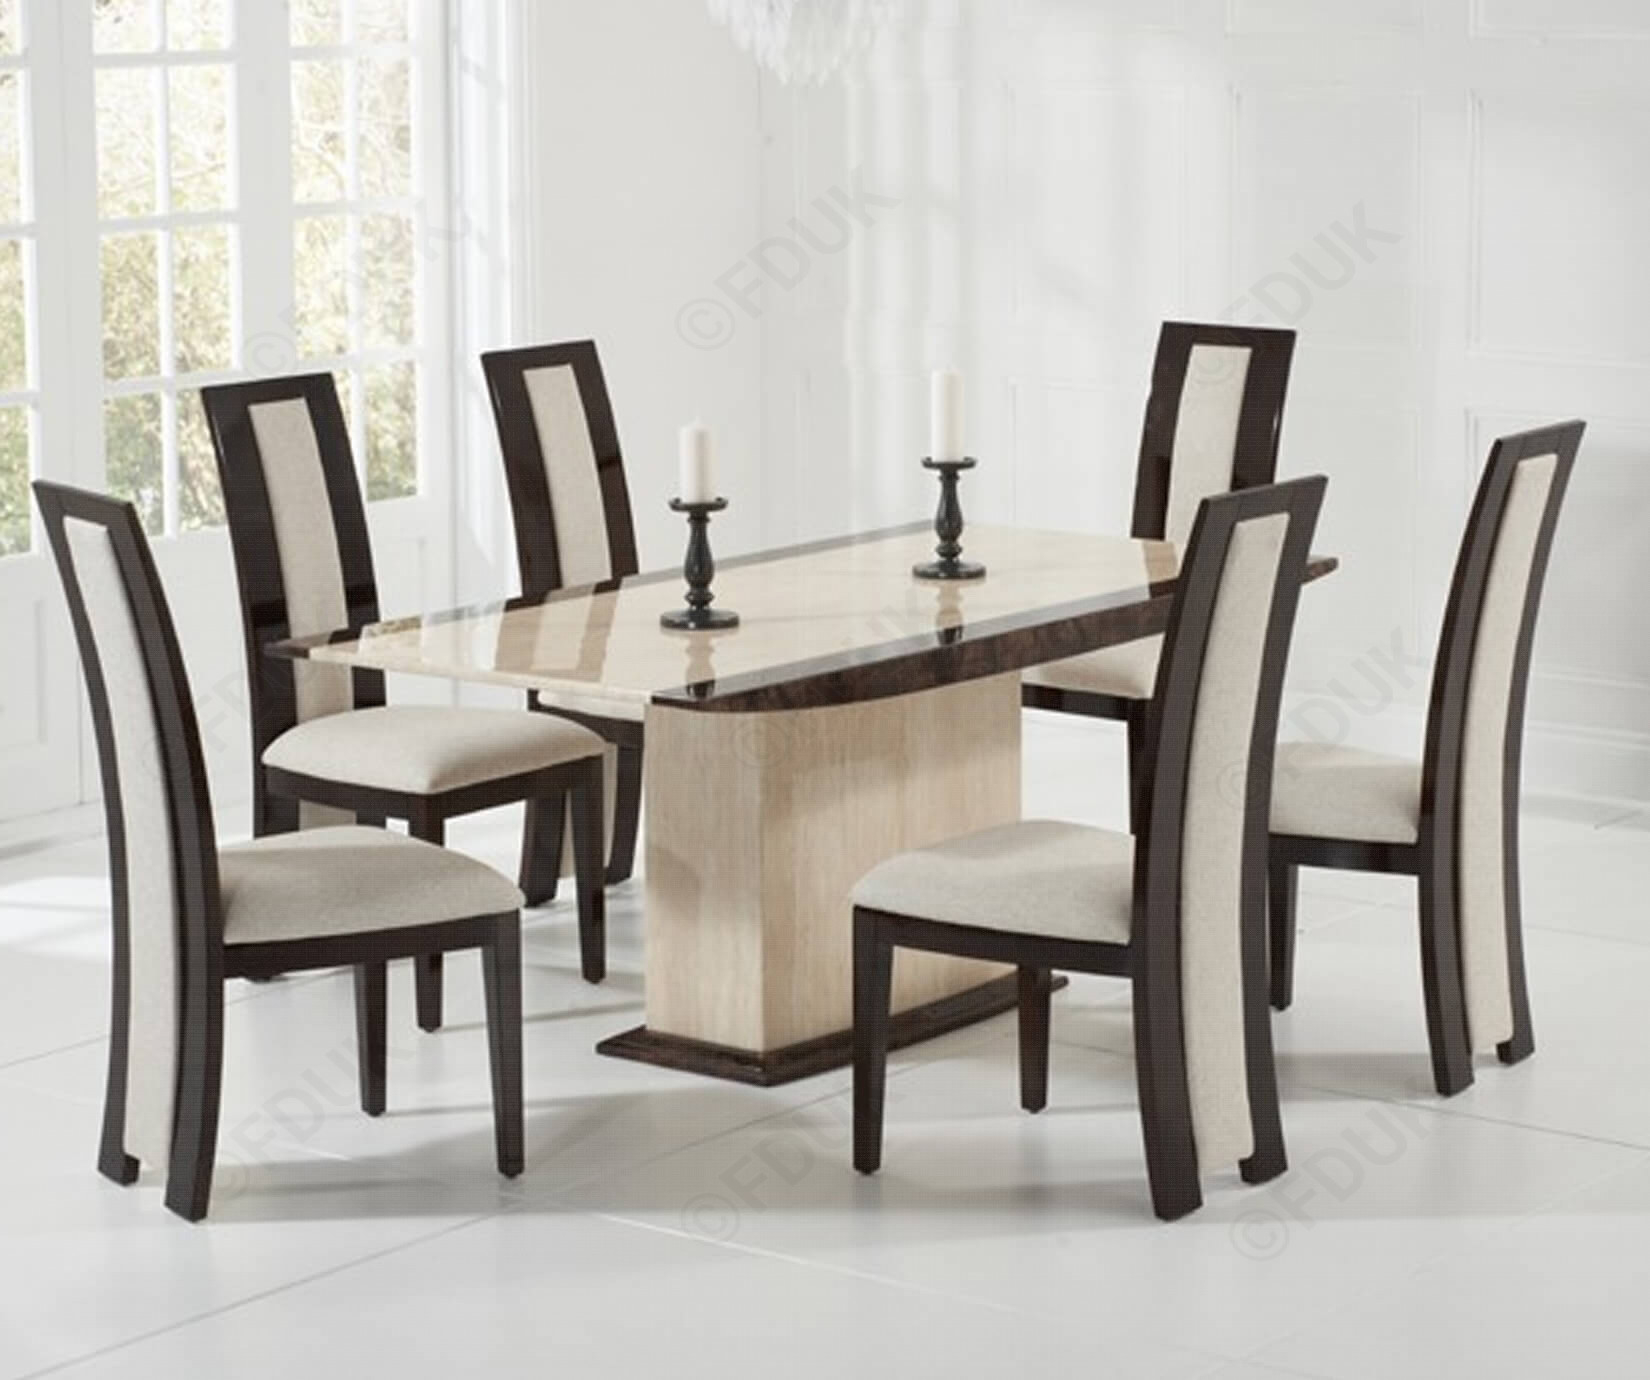 Mark Harris Alba Cream And Brown Constituted Marble Dining Set With 6 Rivilino Chairs inside measurements 1650 X 1380